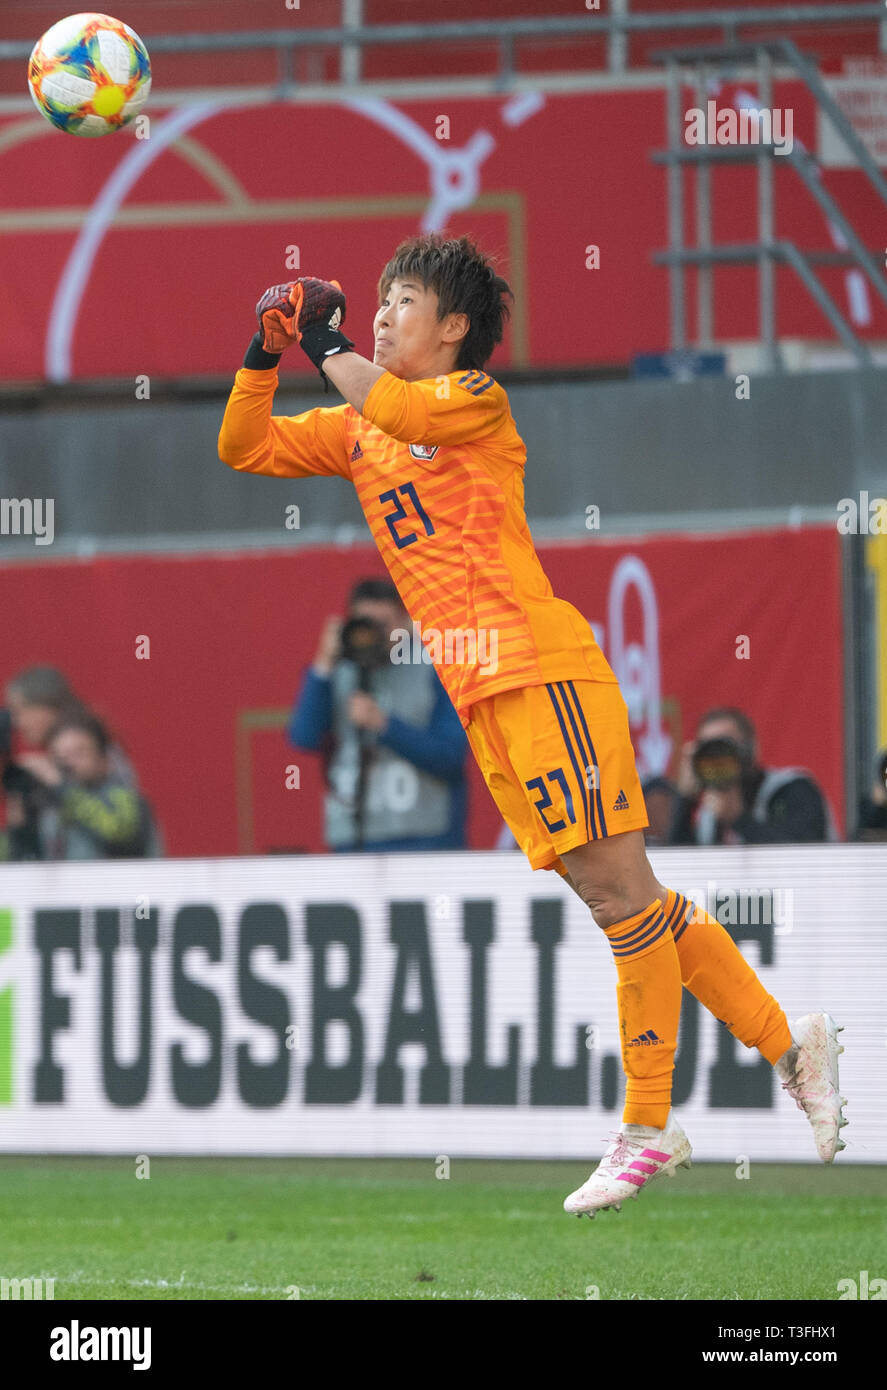 Paderborn, Germany. 09th Apr, 2019. Football, women: International matches, Germany - Japan in the Benteler Arena. Japan's Chika Hirao is playing a ball. Credit: Sebastian Gollnow/dpa/Alamy Live News Stock Photo